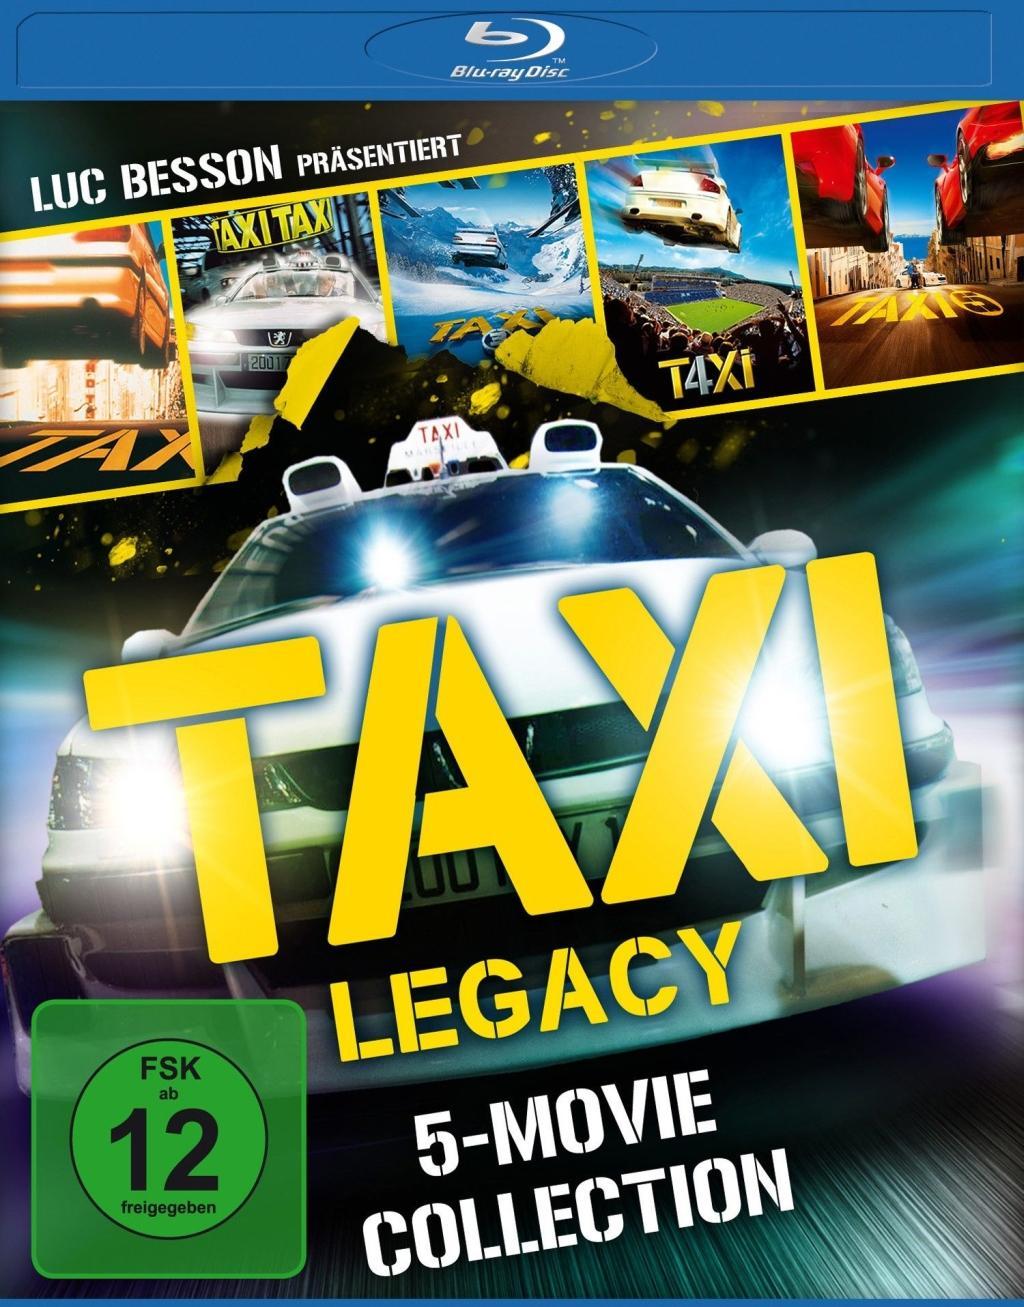 Wideo Taxi Legacy - 5-Movie Collection, 5 Blu-ray 